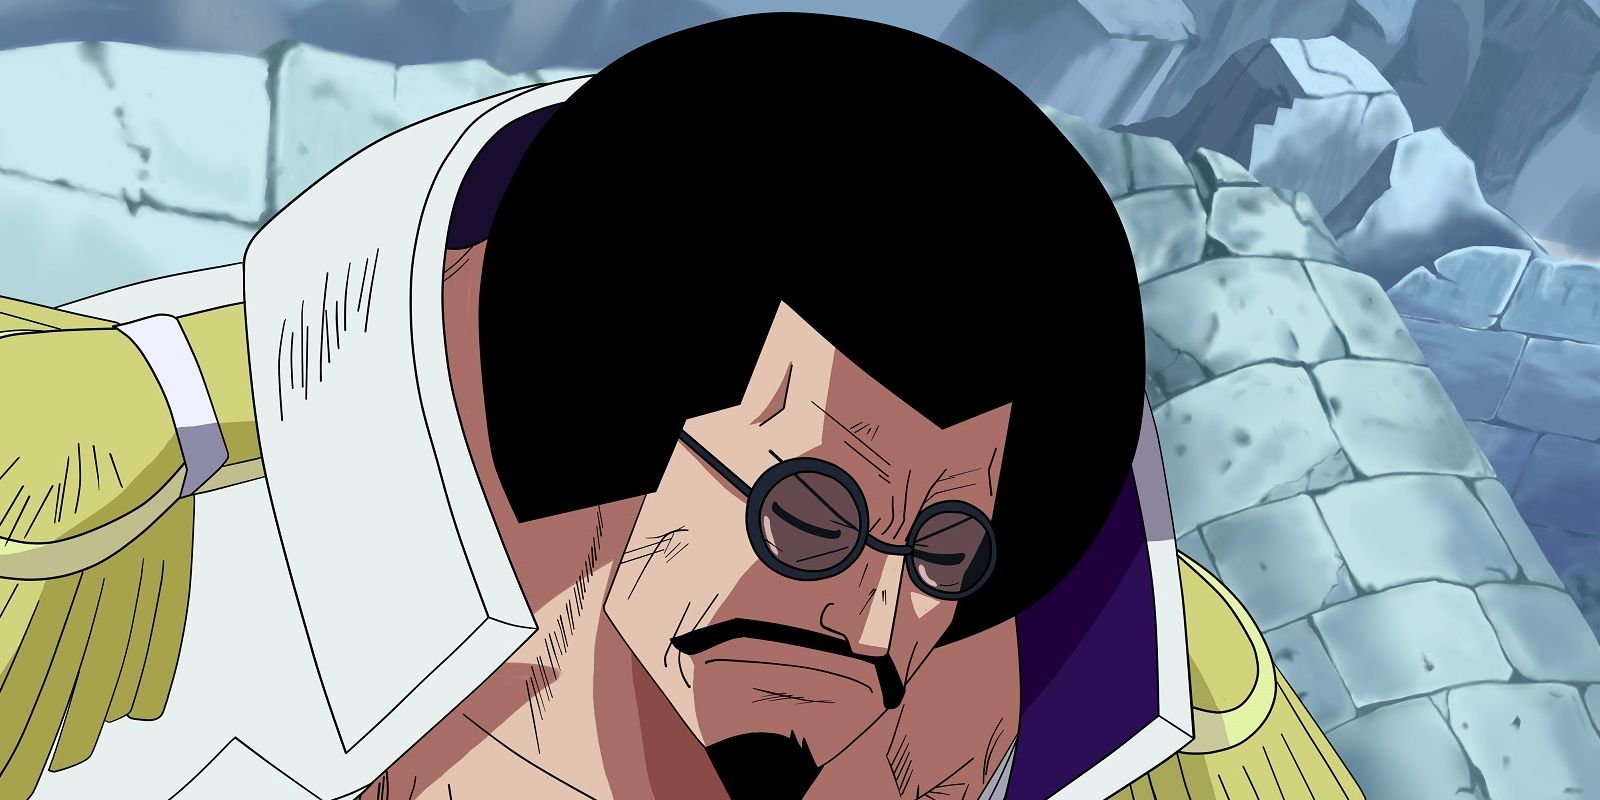 Sengoku concentrating during the Marineford arc in One Piece.